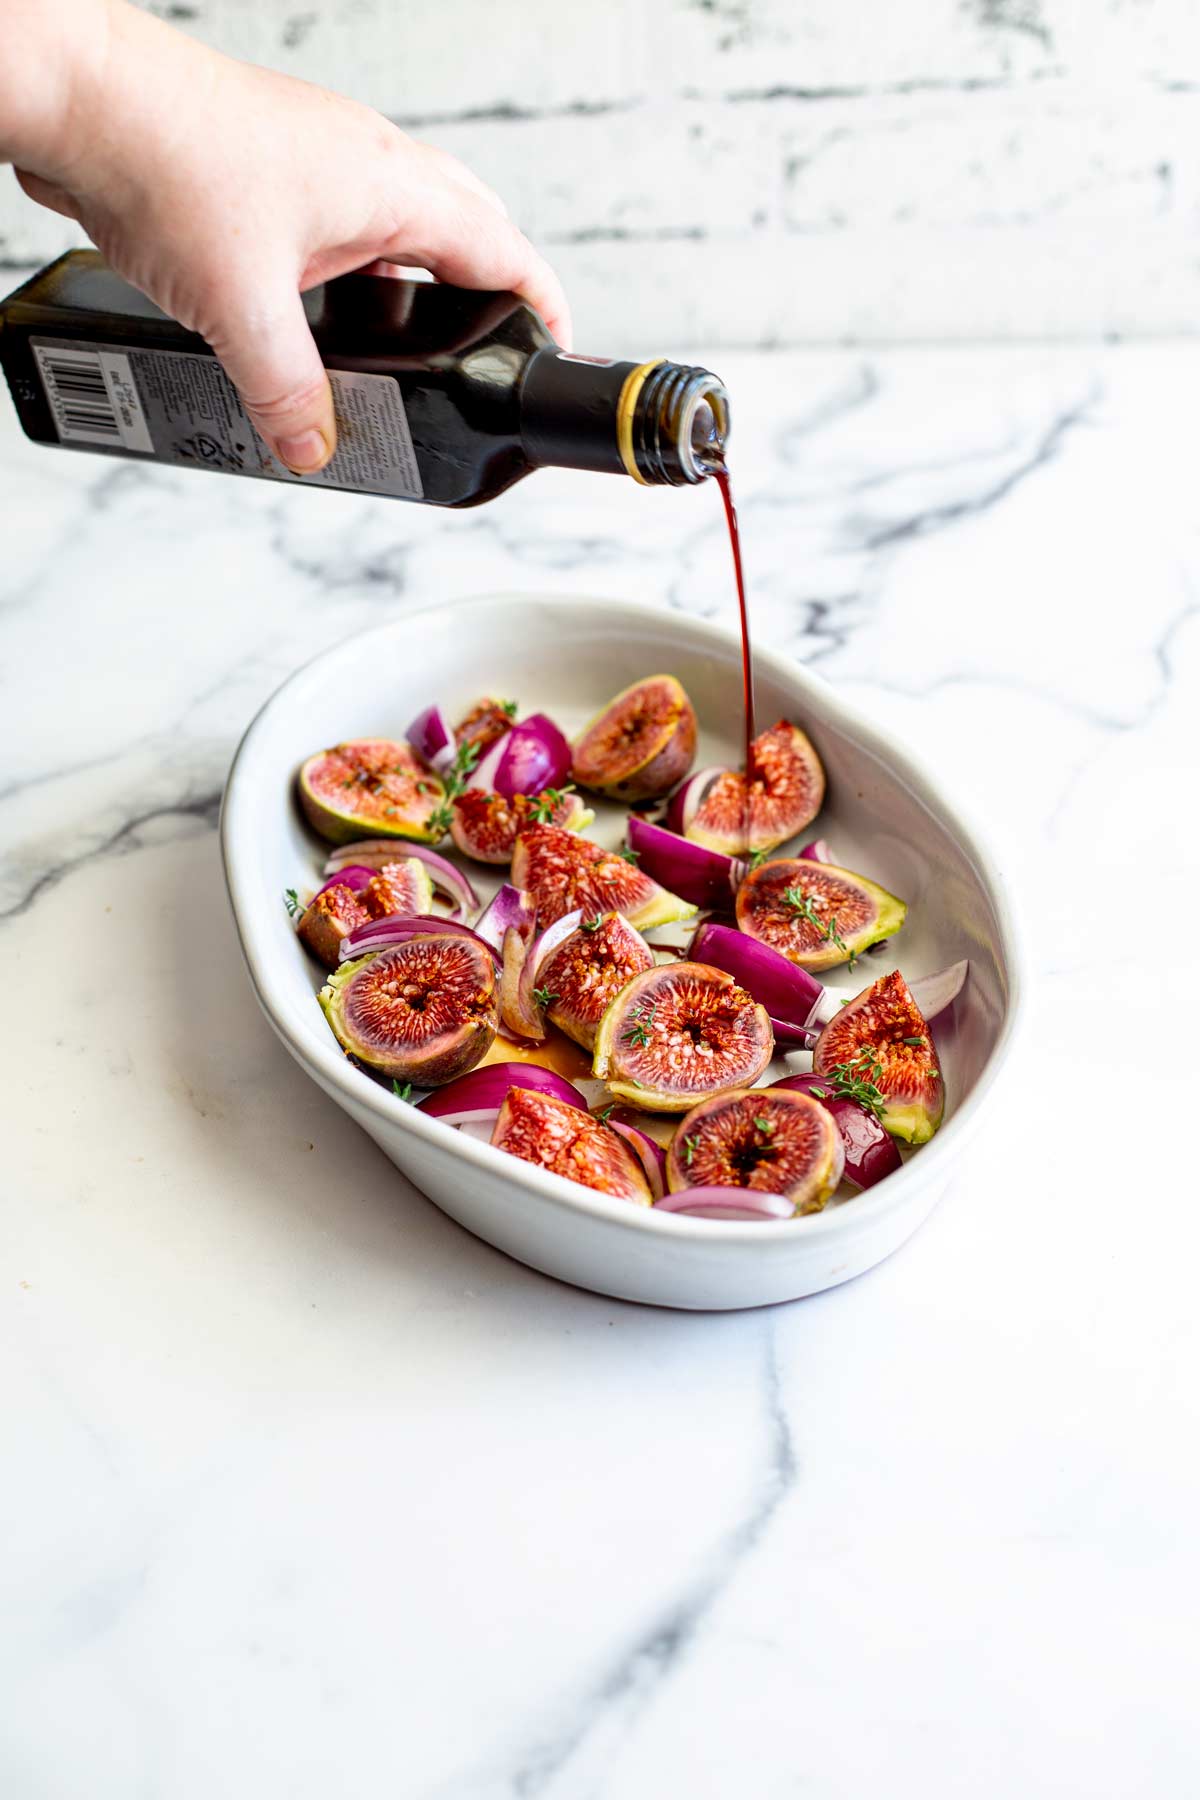 balsamic vinegar being poured into a dish of figs and onions